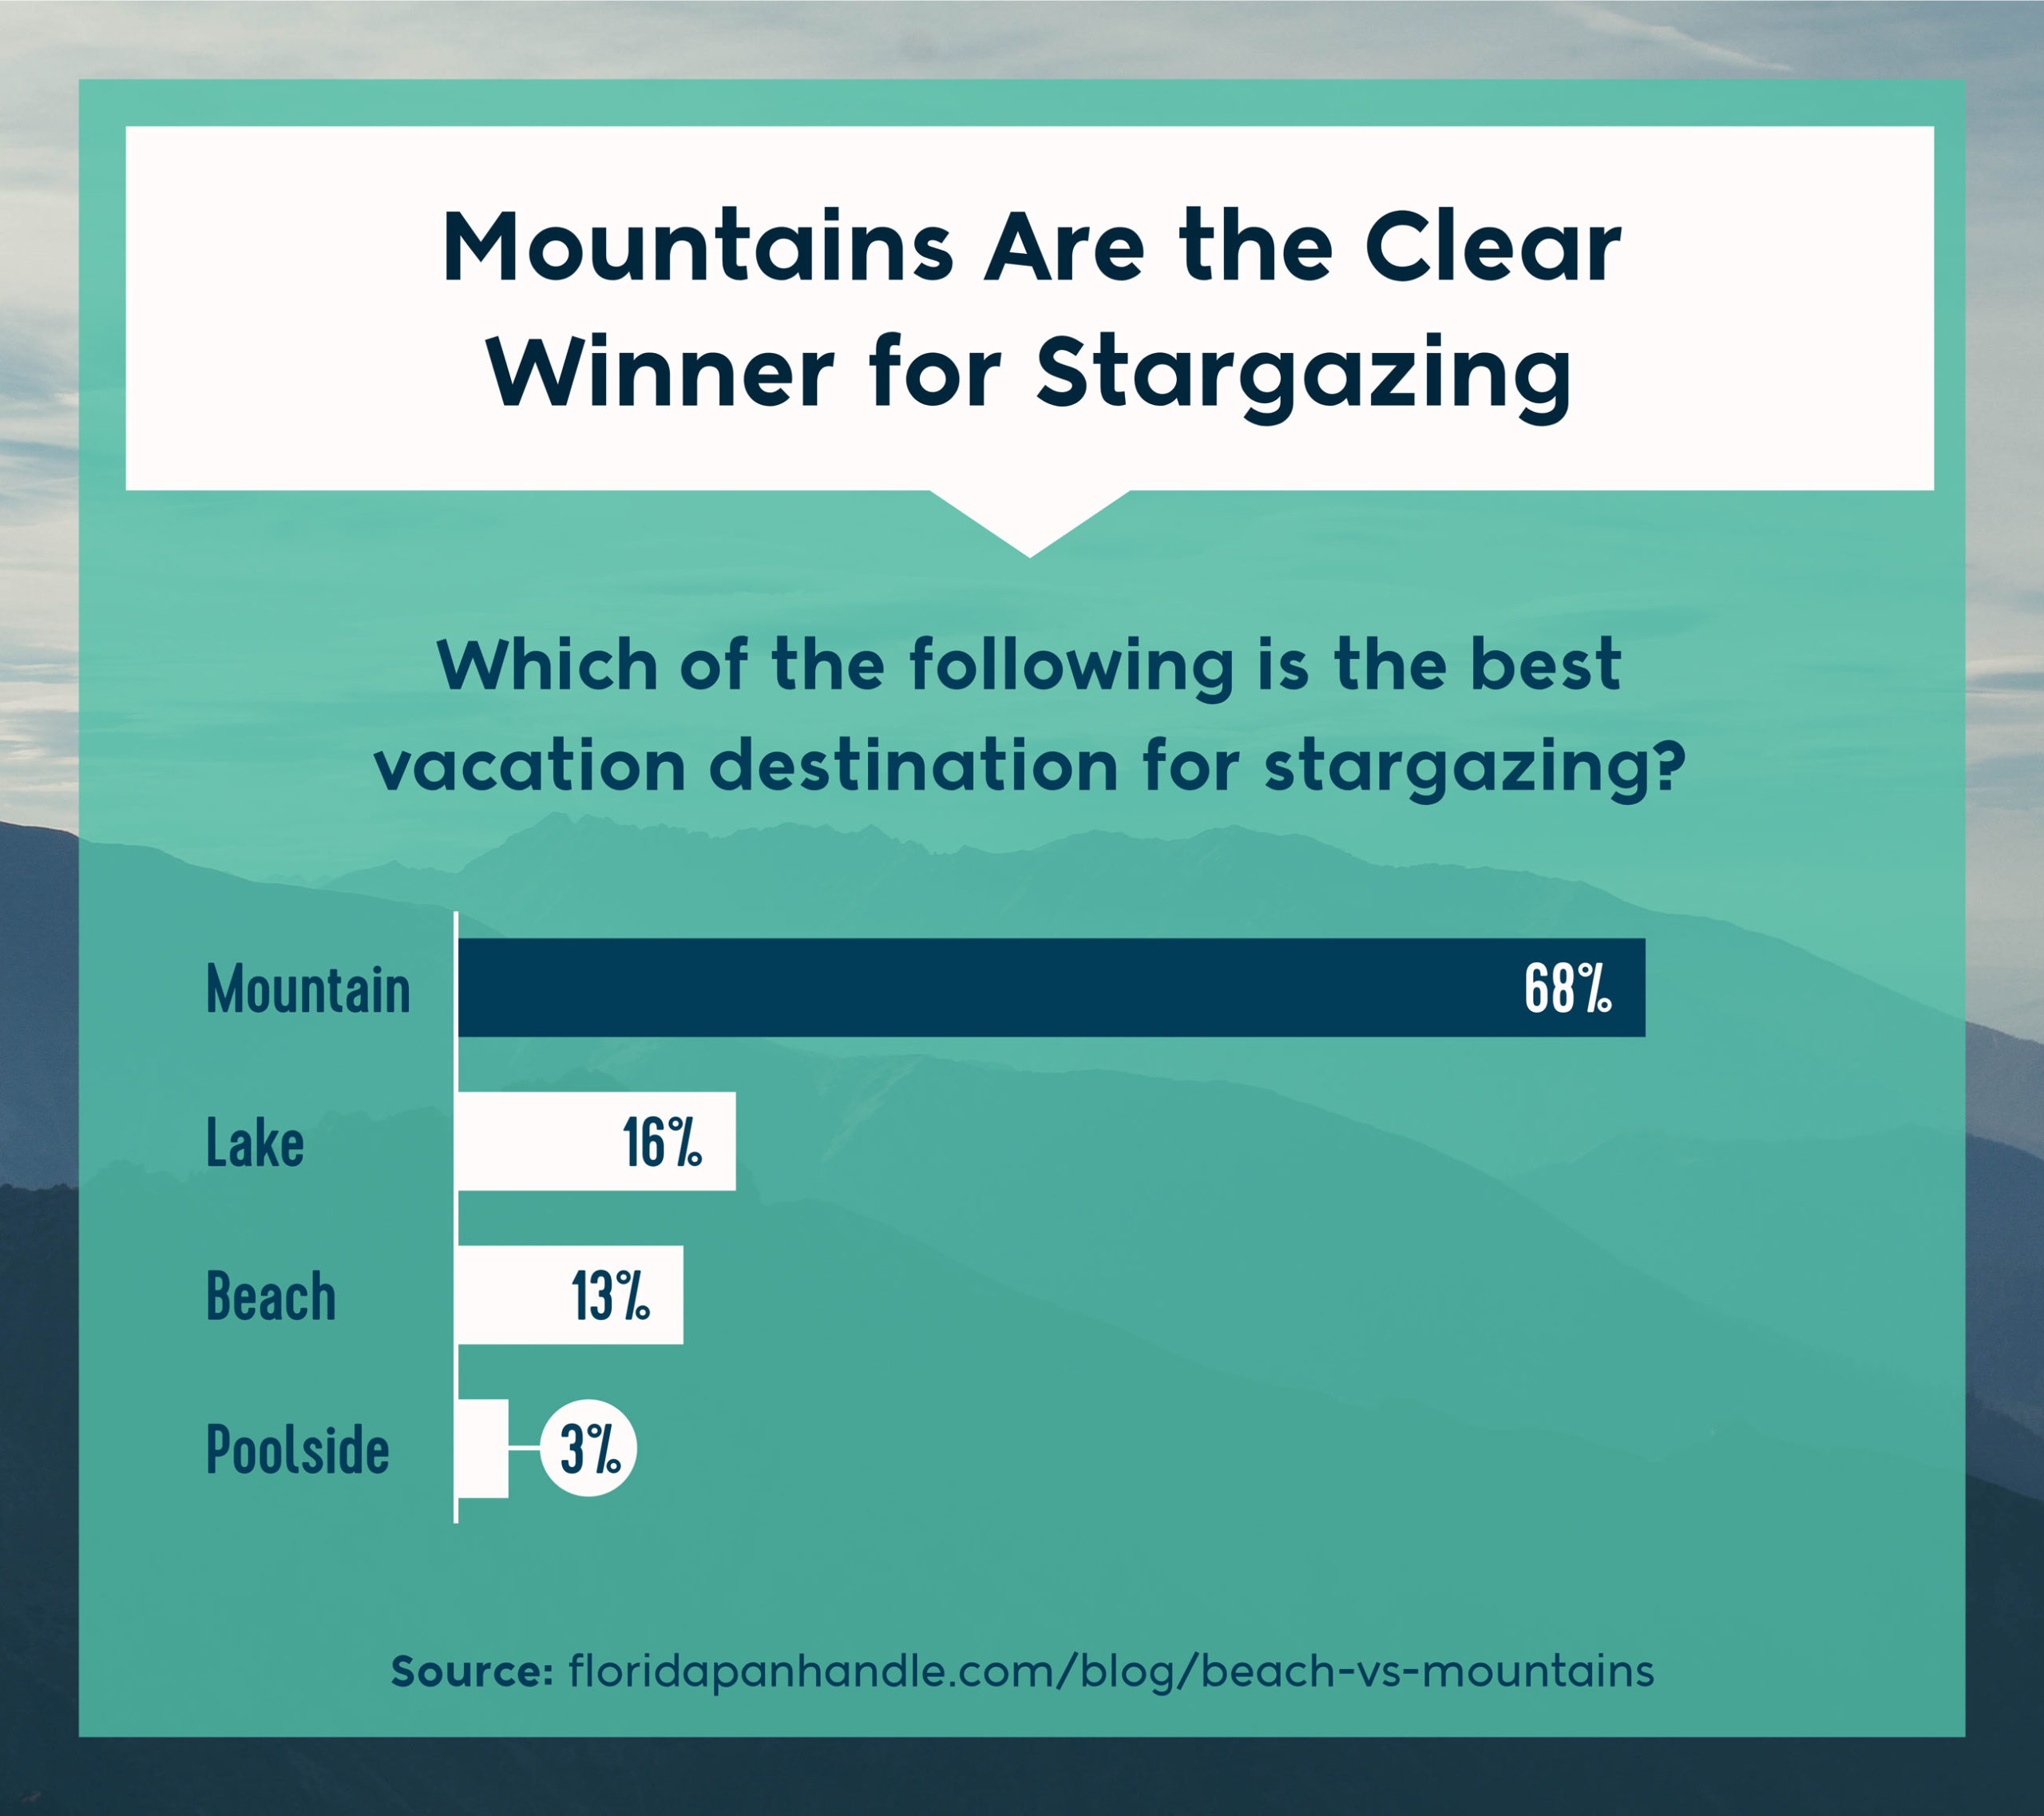 which of the following is the best vacation destination for stargazing - mountain, lake, beach or poolside
